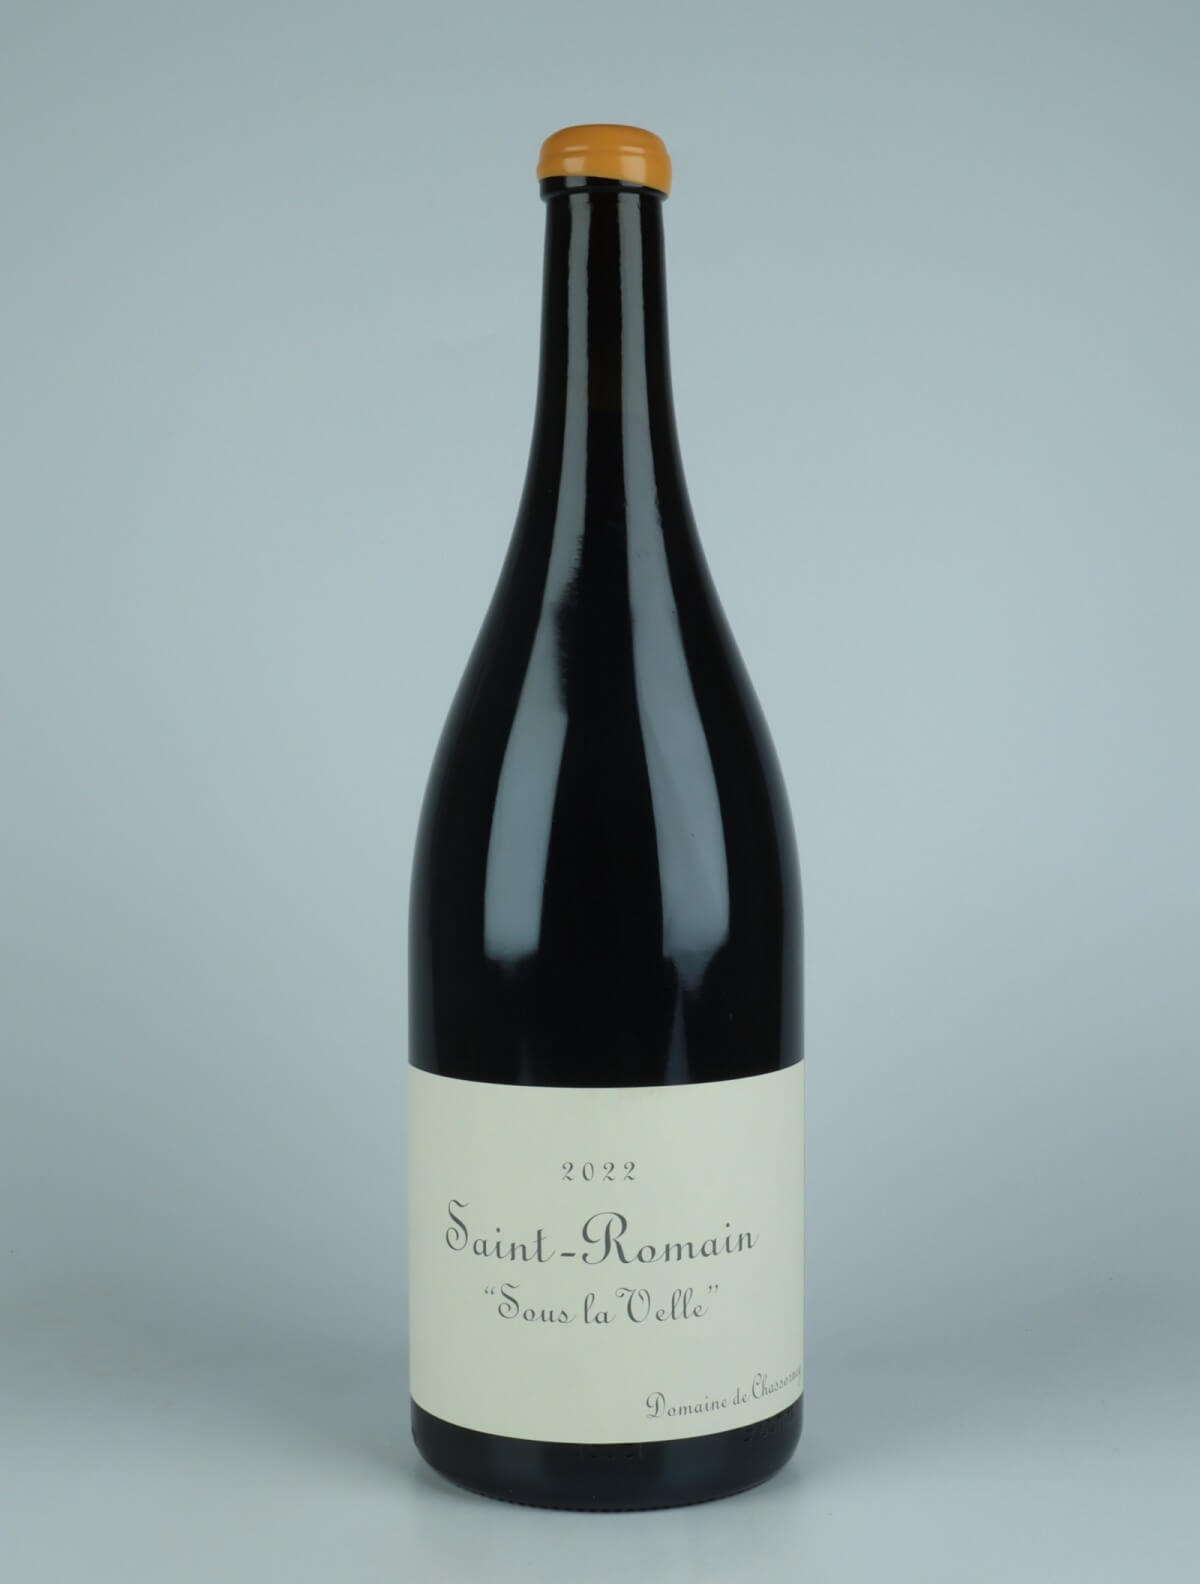 A bottle 2022 Saint Romain Rouge - Sous la Velle Red wine from Domaine de Chassorney, Burgundy in France